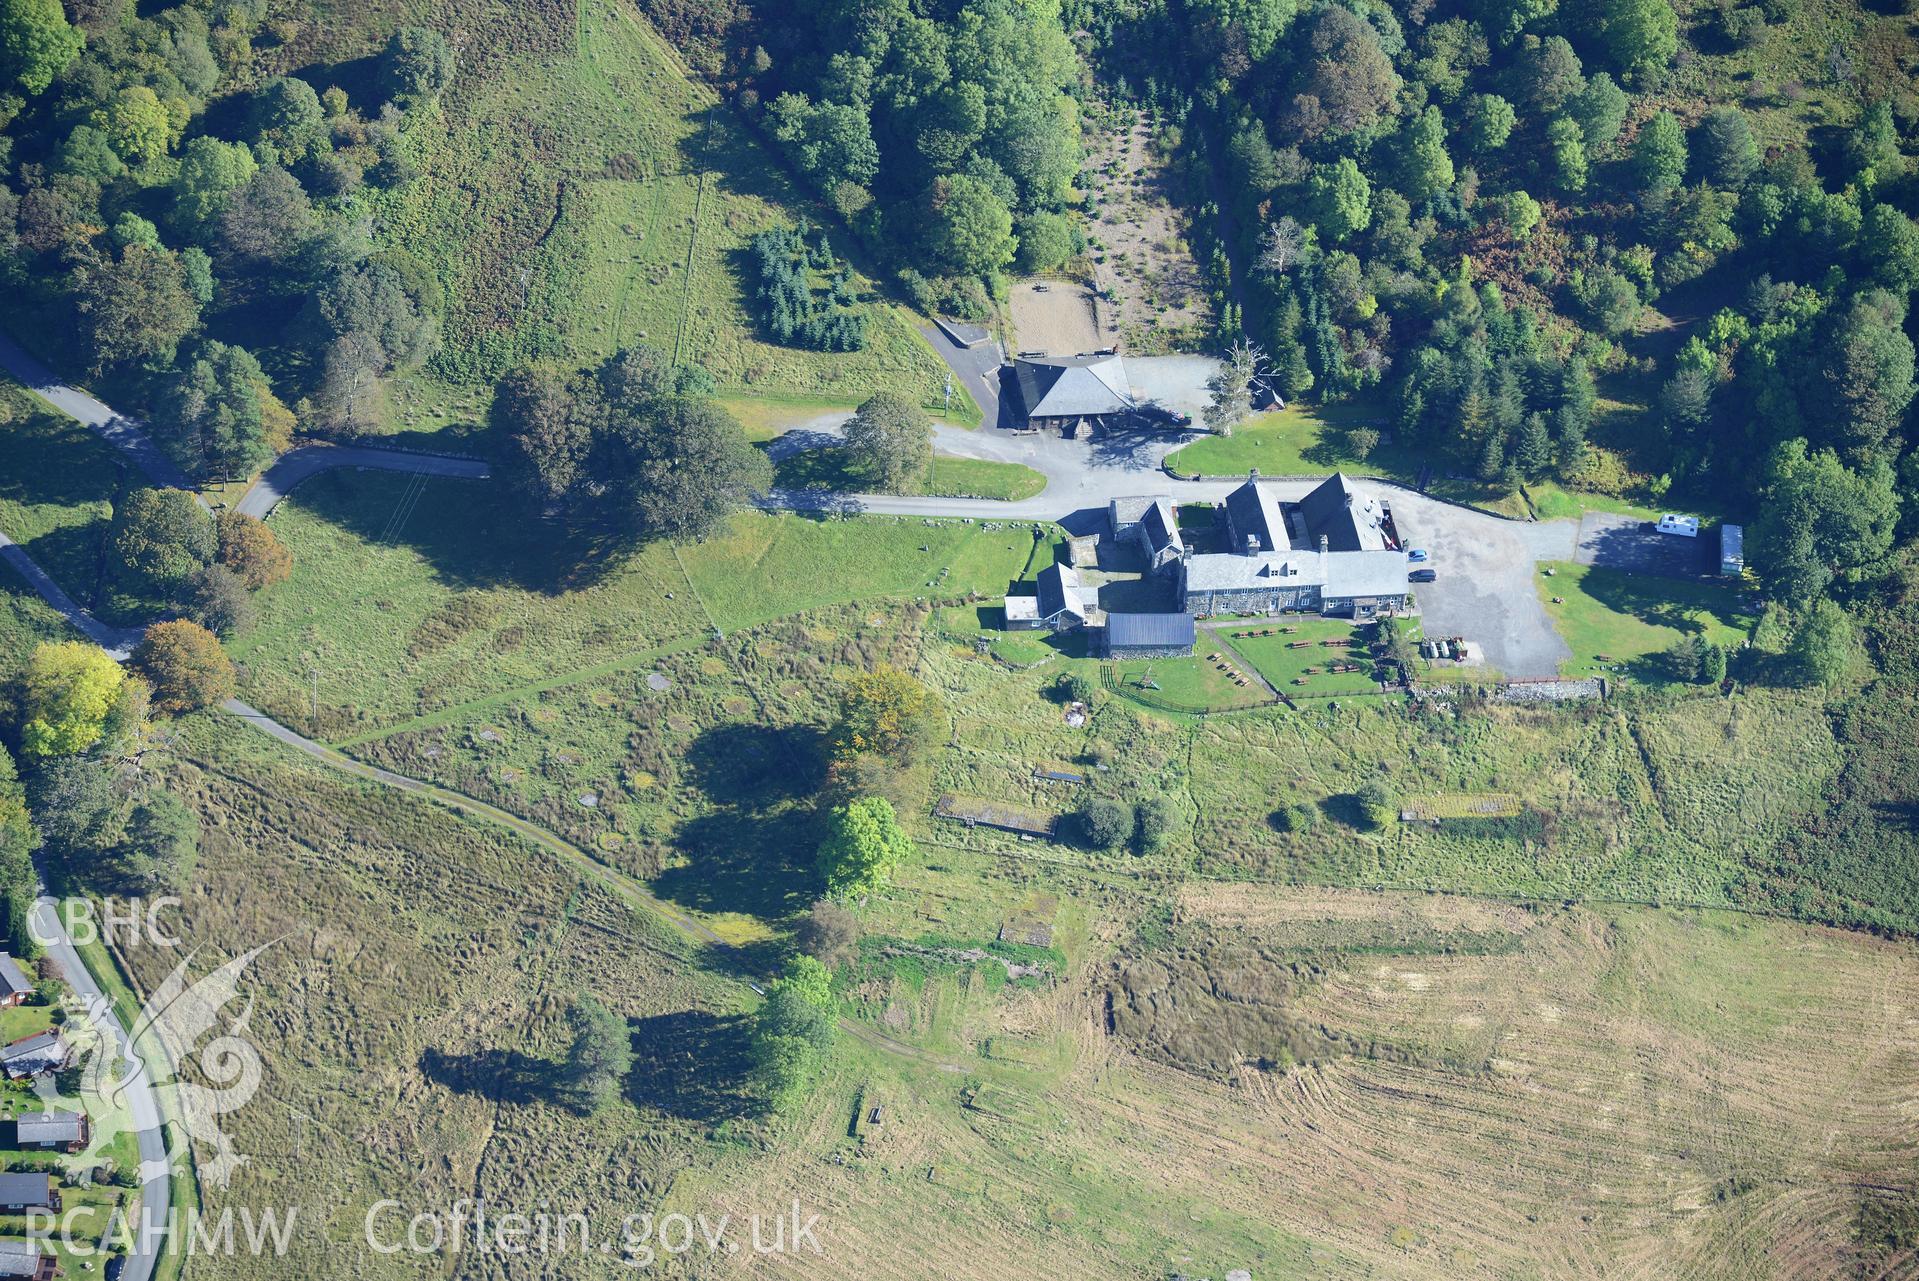 Circular tent bases at the former Trawsfynydd military camp, and Rhiw Goch house, Bronaber. Oblique aerial photograph taken during the Royal Commission's programme of archaeological aerial reconnaissance by Toby Driver on 2nd October 2015.